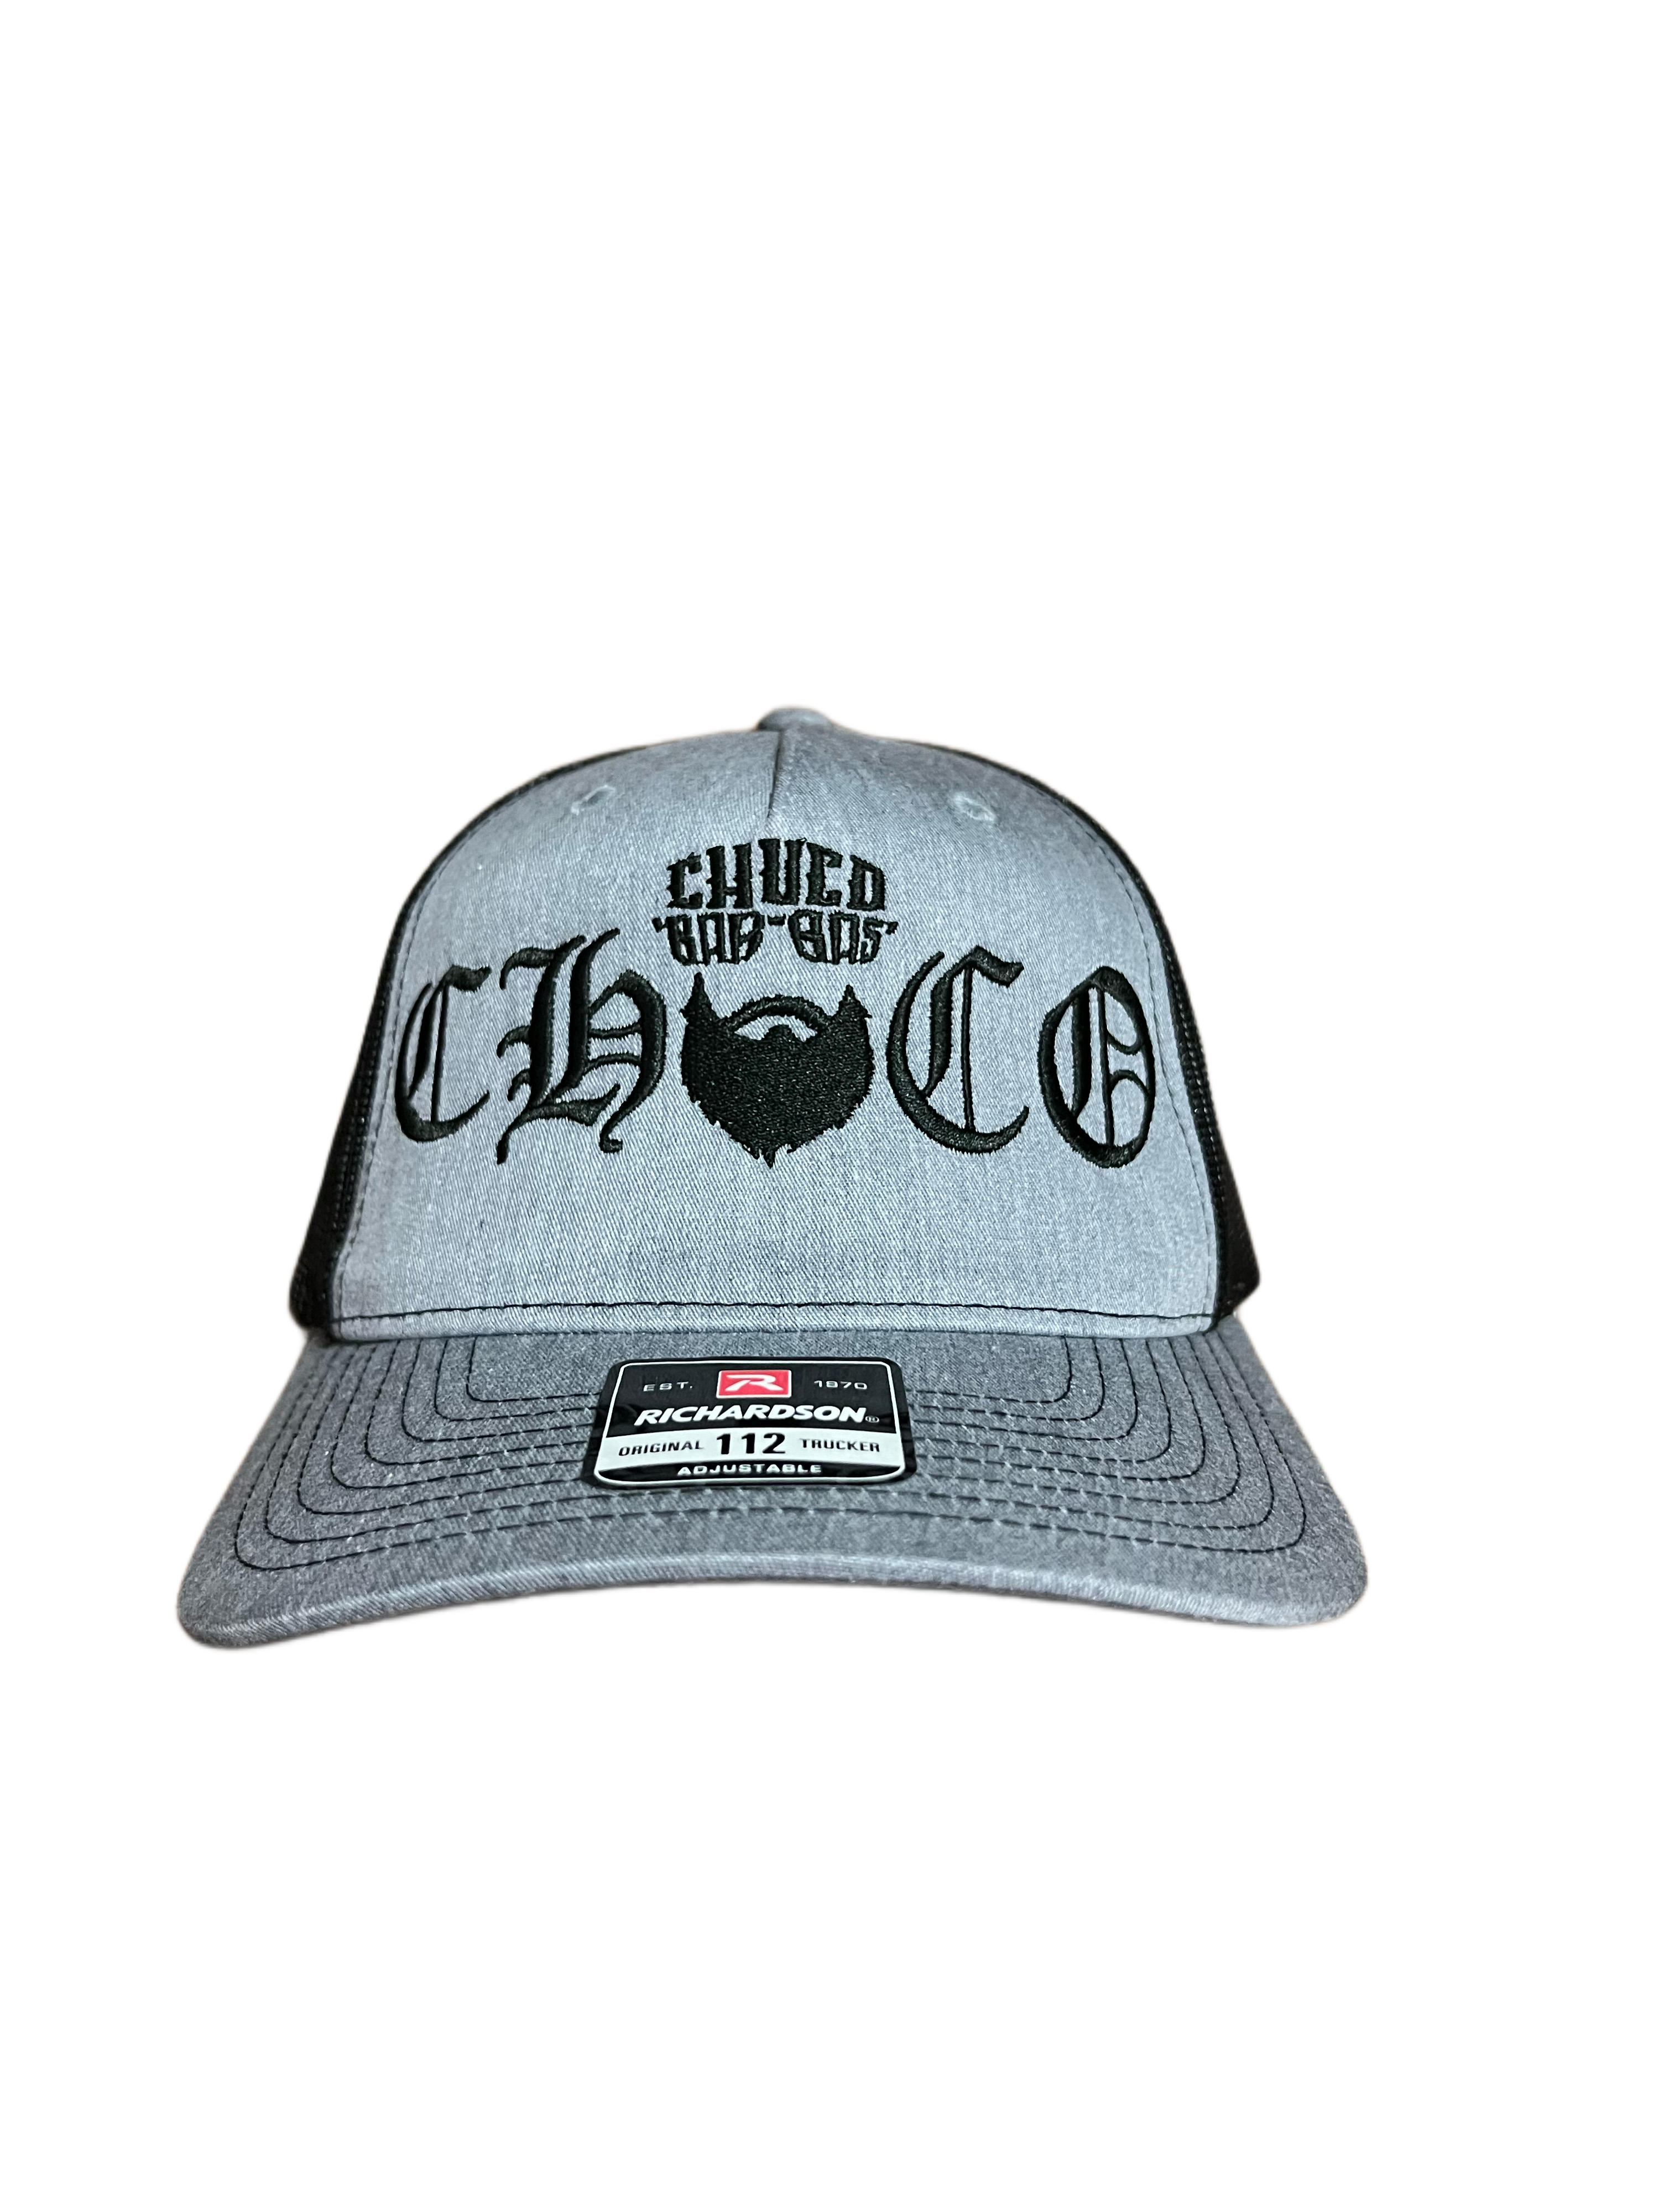 Cap Gray Black Mesh Old English Front View